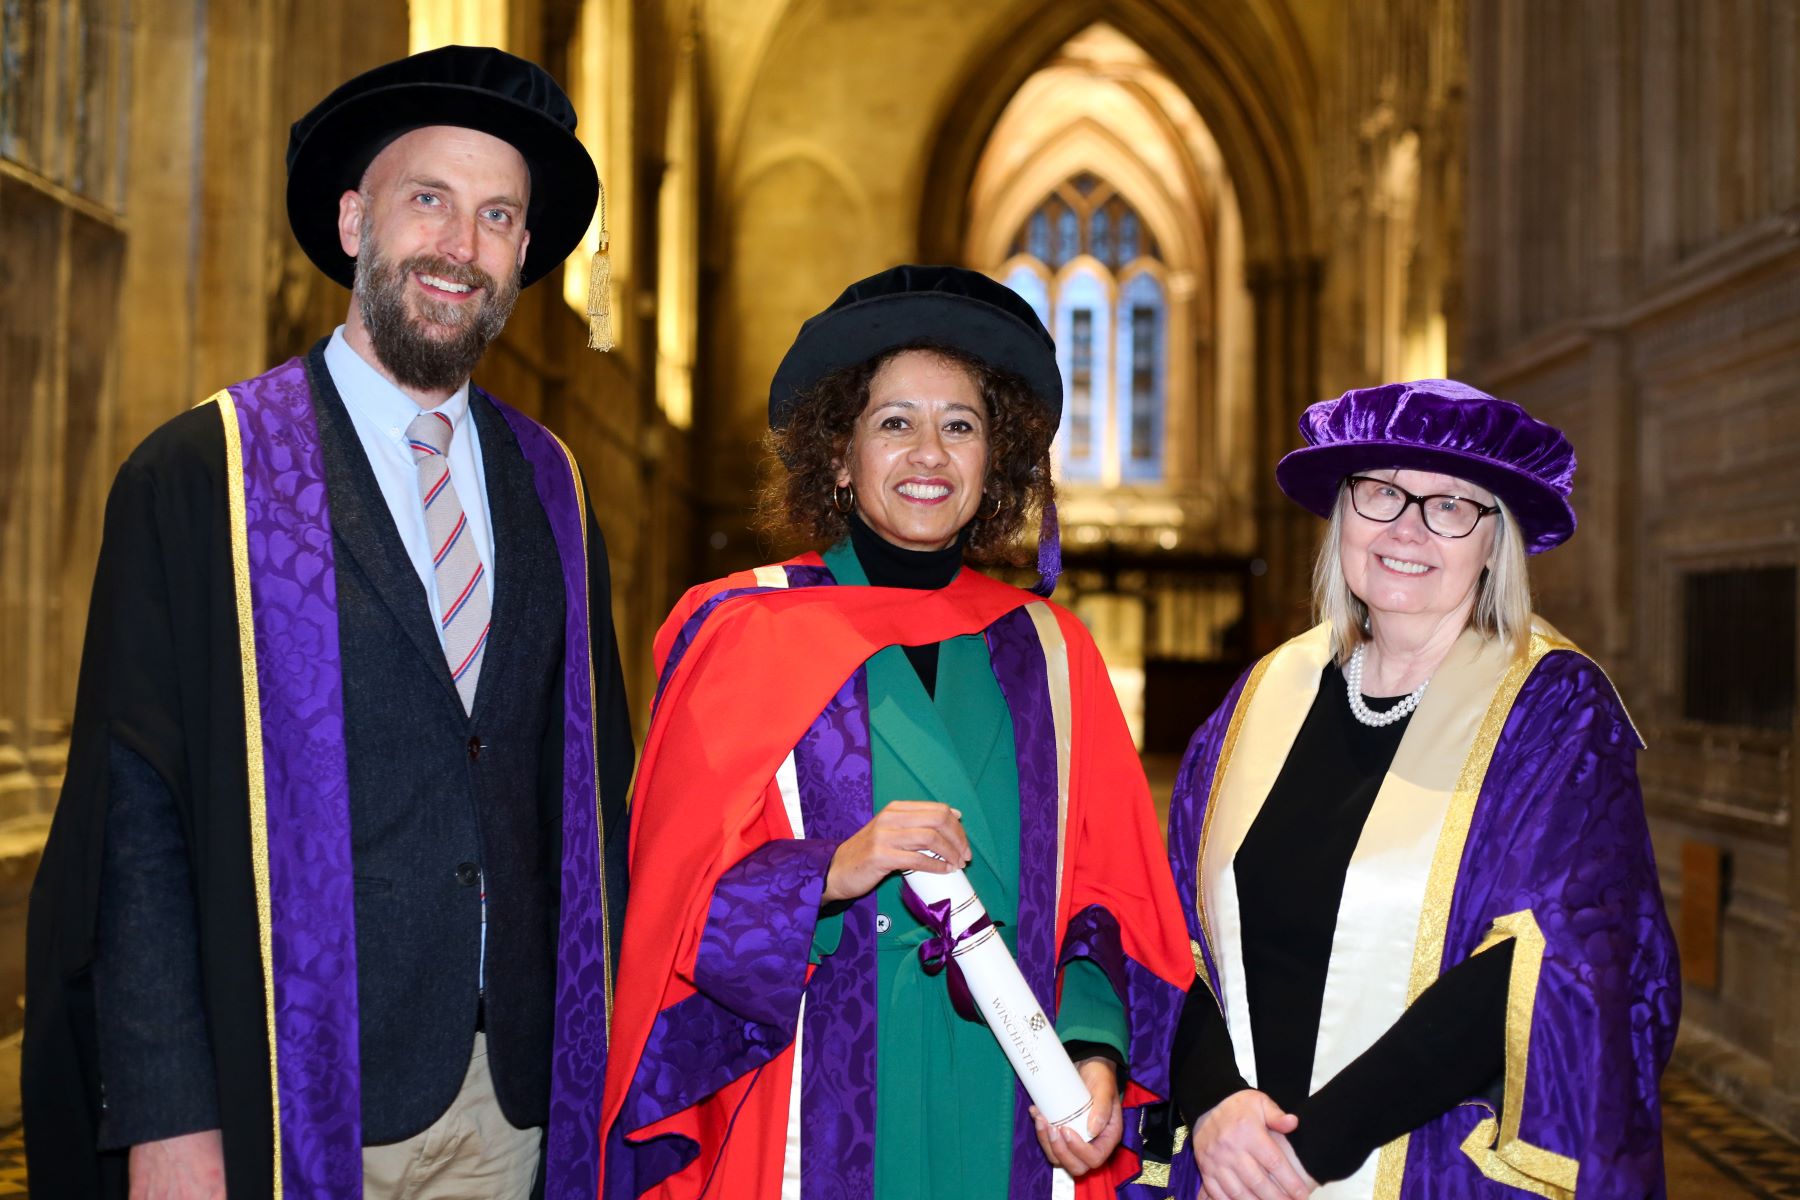 Man and two women in academic robes